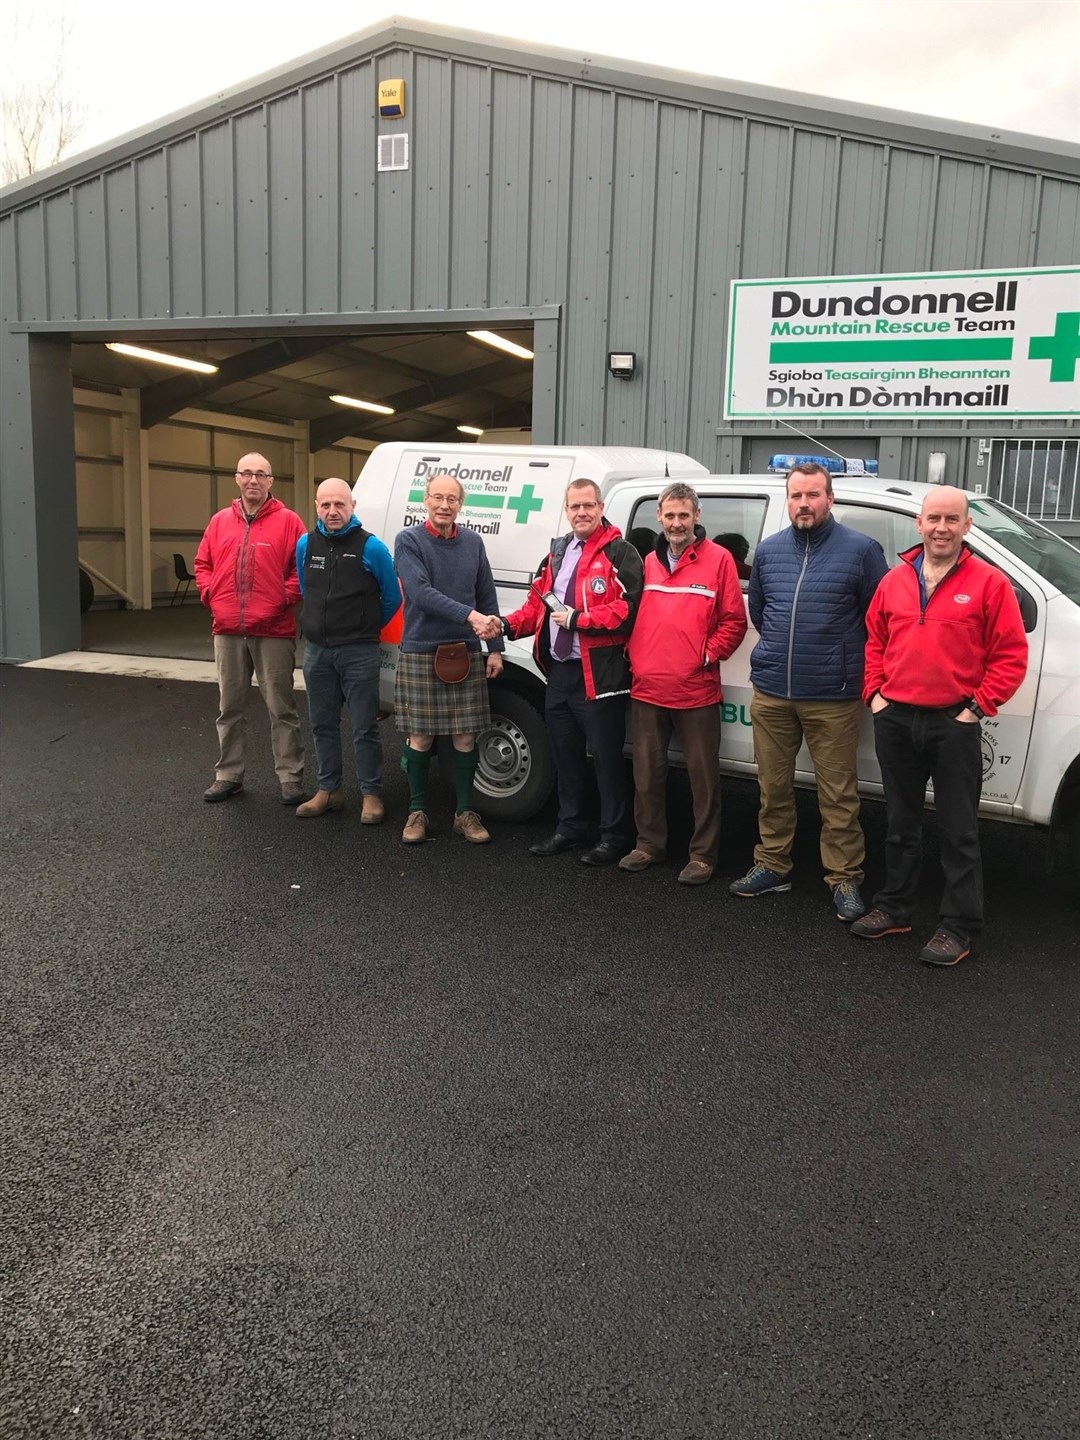 John Cromartie made the presentation of the phones to the Dundonnell Mountain Rescue Team.